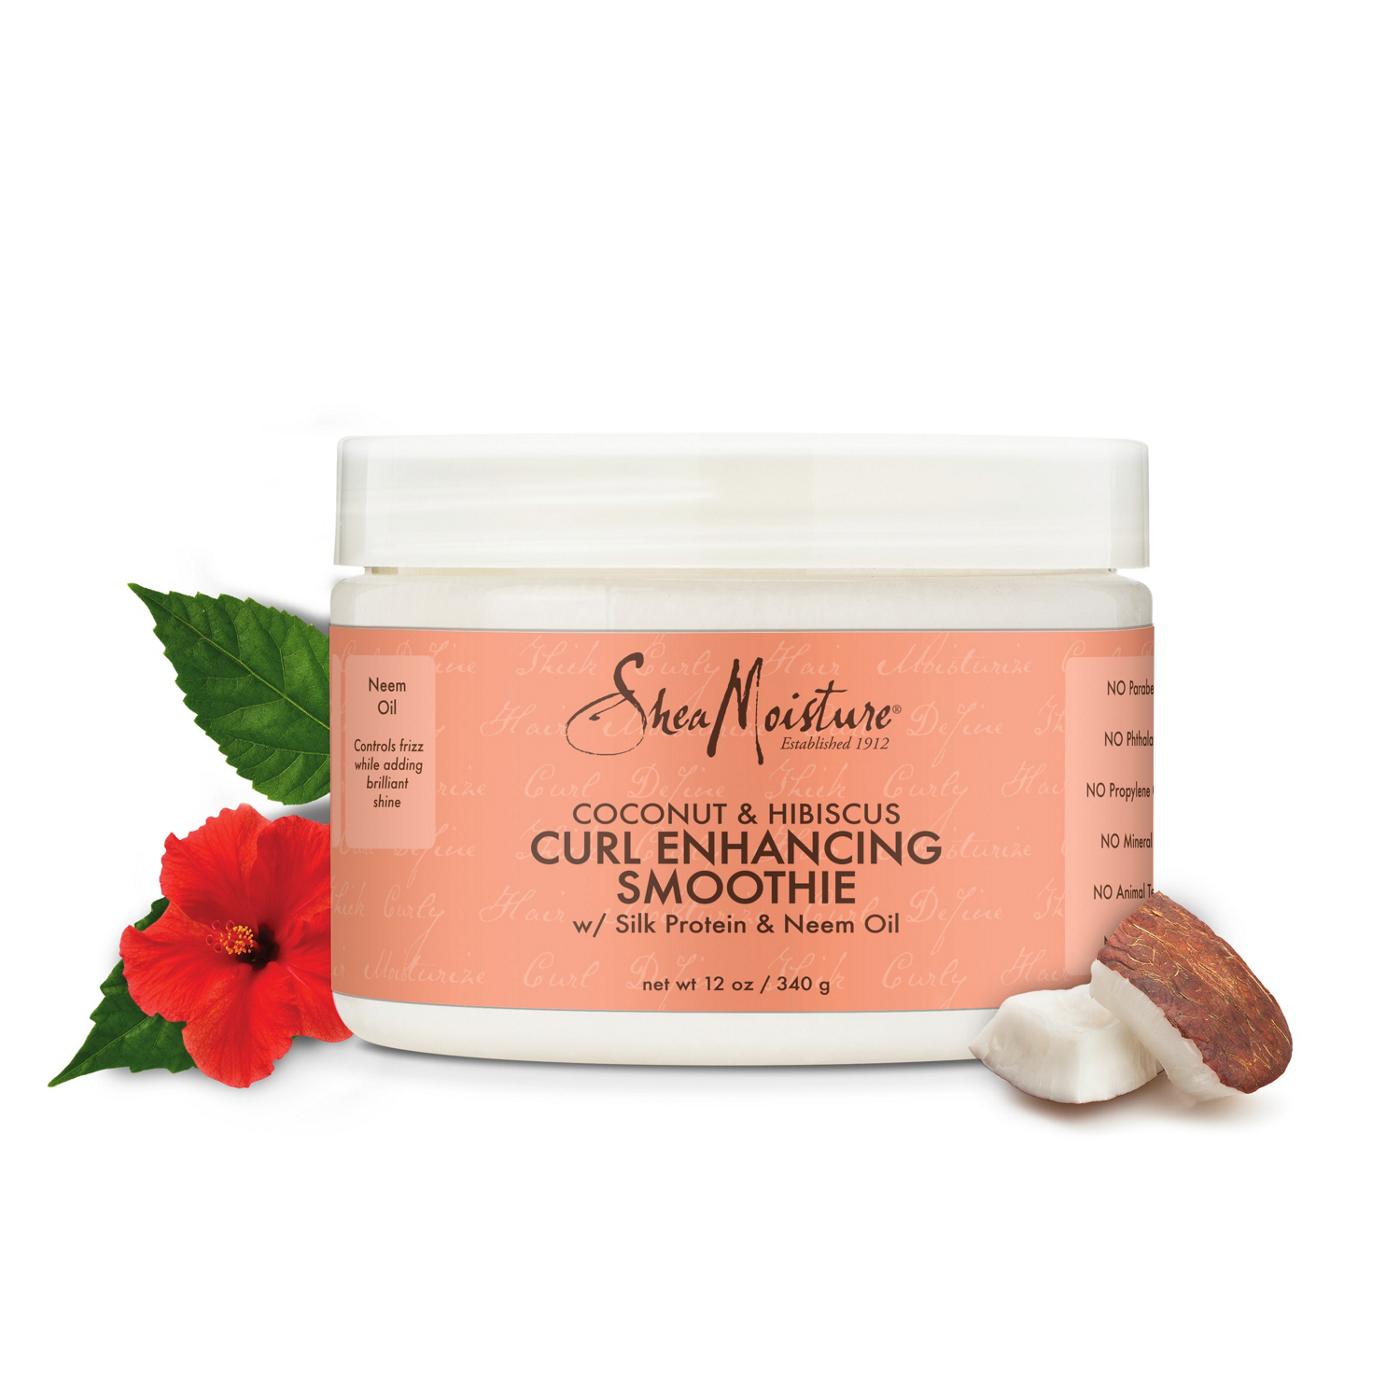 SheaMoisture Smoothie Curl Enhancing Cream - Coconut and Hibiscus; image 8 of 10